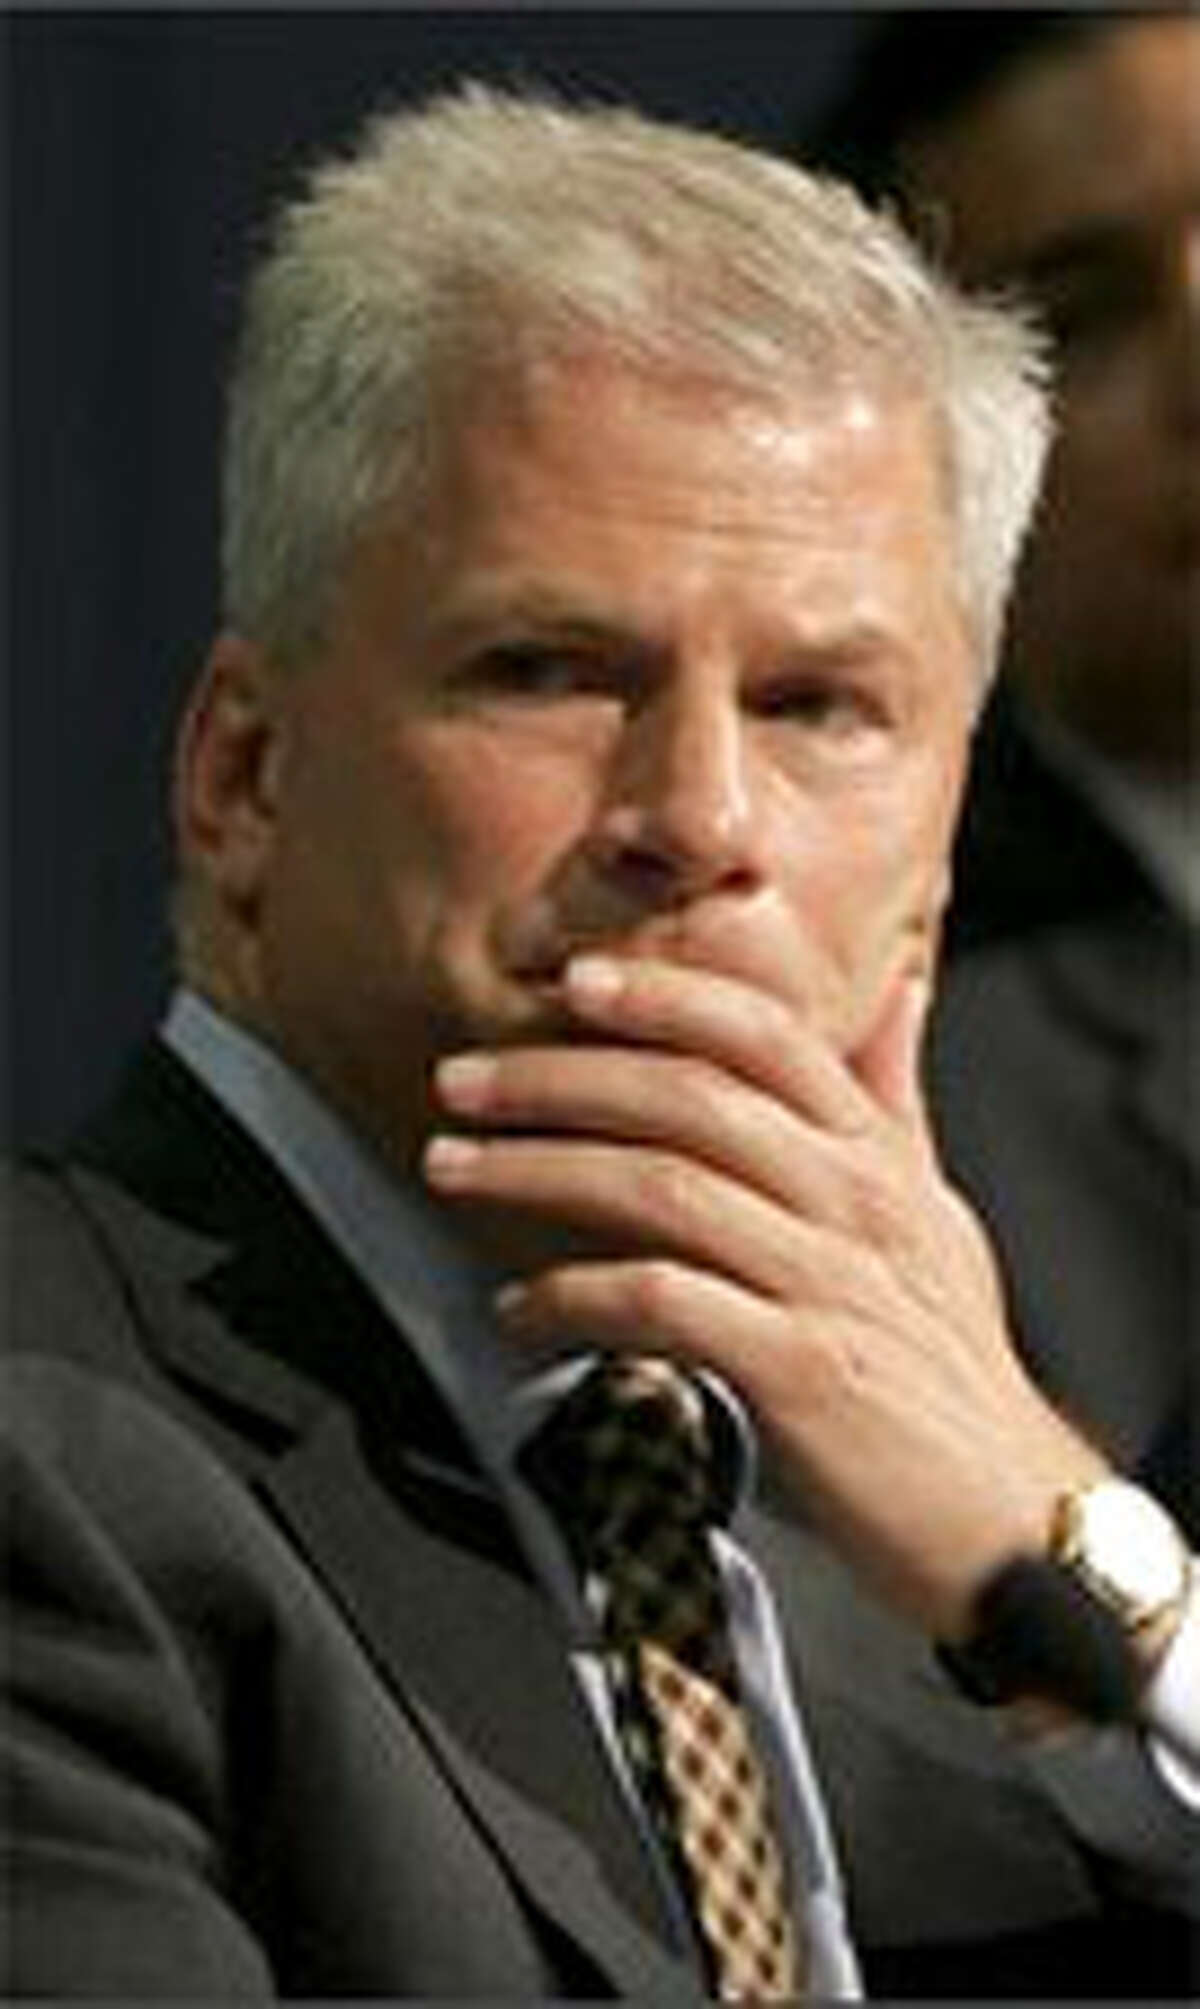 Former U.S. Attorney for Western Washington John McKay is seen in this 2007 file photo.